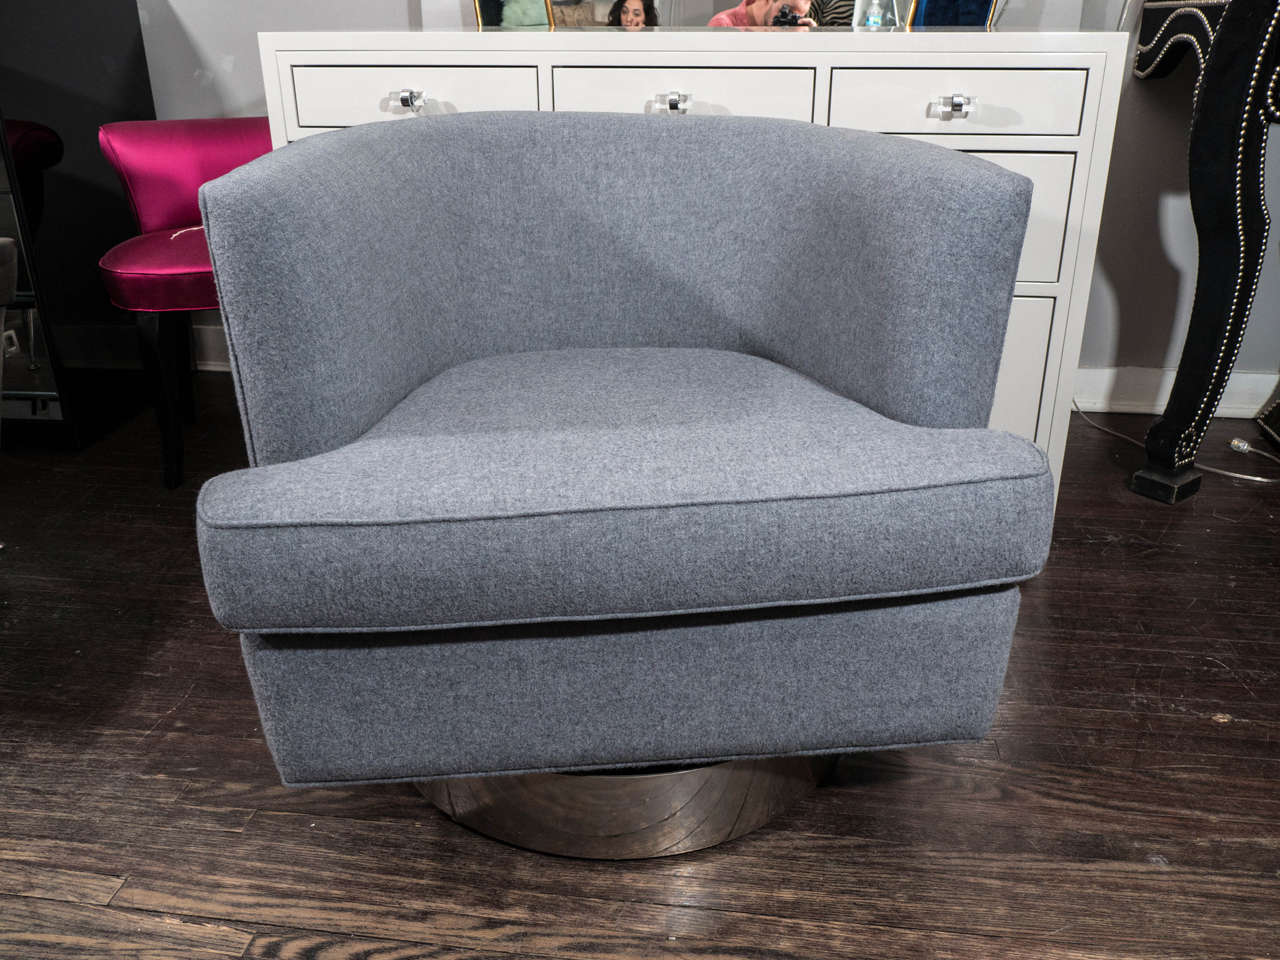 Pair of Milo Baughman swivel chairs upholstered in heather grey wool.